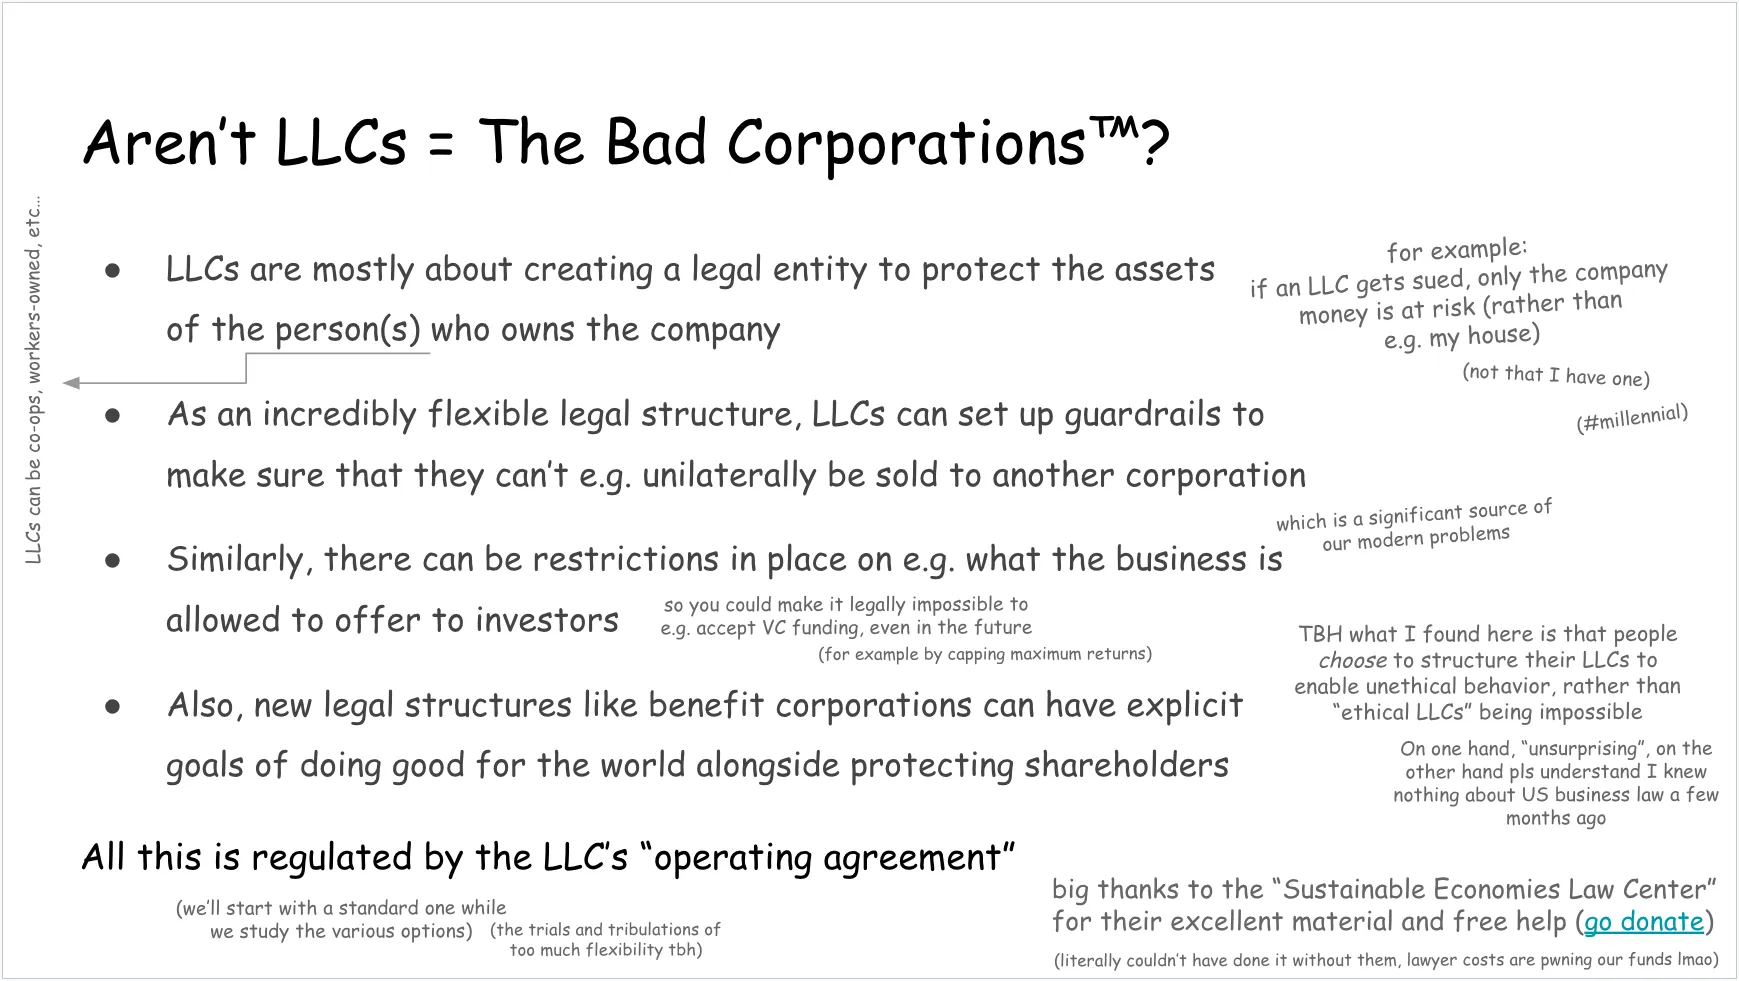 Another slide, talking about the misconception that LLCs are The Bad Corporations and what they actually are. Full text follows.

Aren’t LLCs = The Bad Corporations (trademark symbol)?

LLCs are mostly about creating a legal entity to protect the assets of the person(s) who owns the company (LLCs can be co-ops, workers-owned, etc…)

On the side: for example: if an LLC gets sued, only the company money is at risk (rather than e.g. my house)
(not that I have one)
(hashtag millennial)

Back to bullet points:
As an incredibly flexible legal structure, LLCs can set up guardrails to make sure that they can’t e.g. unilaterally be sold to another corporation (which is a significant source of our modern problems)
Similarly, there can be restrictions in place on e.g. what the business is allowed to offer to investors

On the side:
so you could make it legally impossible to e.g. accept VC funding, even in the future (for example by capping maximum returns)

Last bullet point:
Also, new legal structures like benefit corporations can have explicit goals of doing good for the world alongside protecting shareholders

Underneath this last bullet point:
TBH what I found here is that people choose to structure their LLCs to enable unethical behavior, rather than “ethical LLCs” being impossible
On one hand, “unsurprising”, on the other hand pls understand I knew nothing about US business law a few months ago

Concluding note:
All this is regulated by the LLC’s “operating agreement” (we’ll start with a standard one while we study the various options) (the trials and tribulations of too much flexibility tbh)

In a bottom corner:
big thanks to the “Sustainable Economies Law Center” for their excellent material and free help (link: go donate) (literally couldn’t have done it without them, lawyer costs are pwning our funds lmao)


